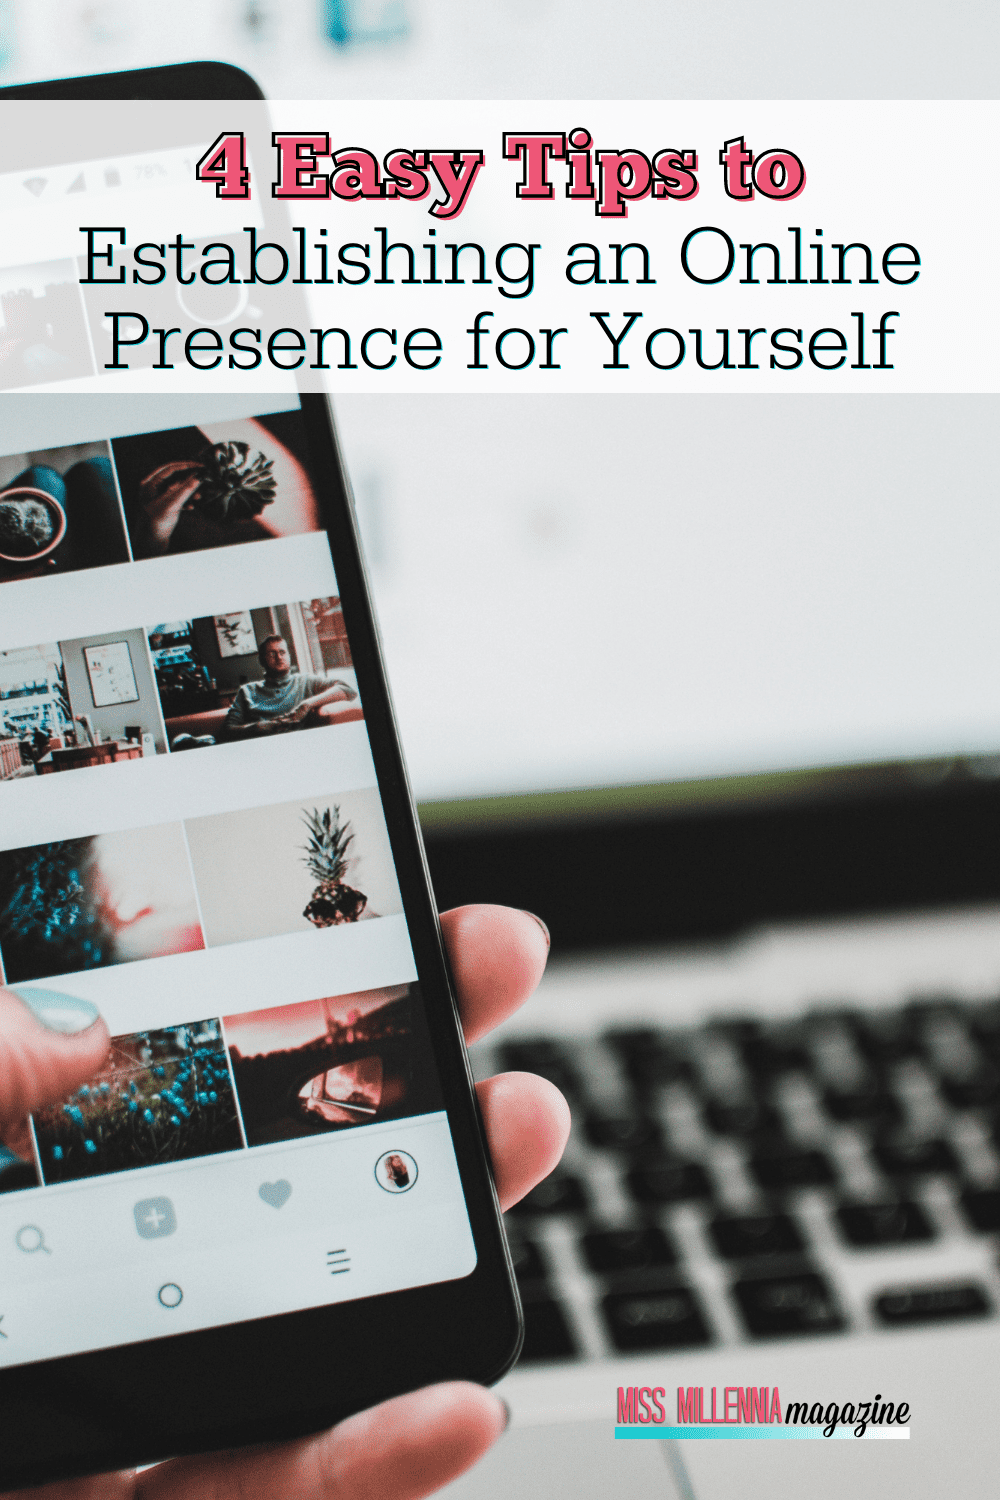 4 Easy Tips to Establishing an Online Presence for Yourself